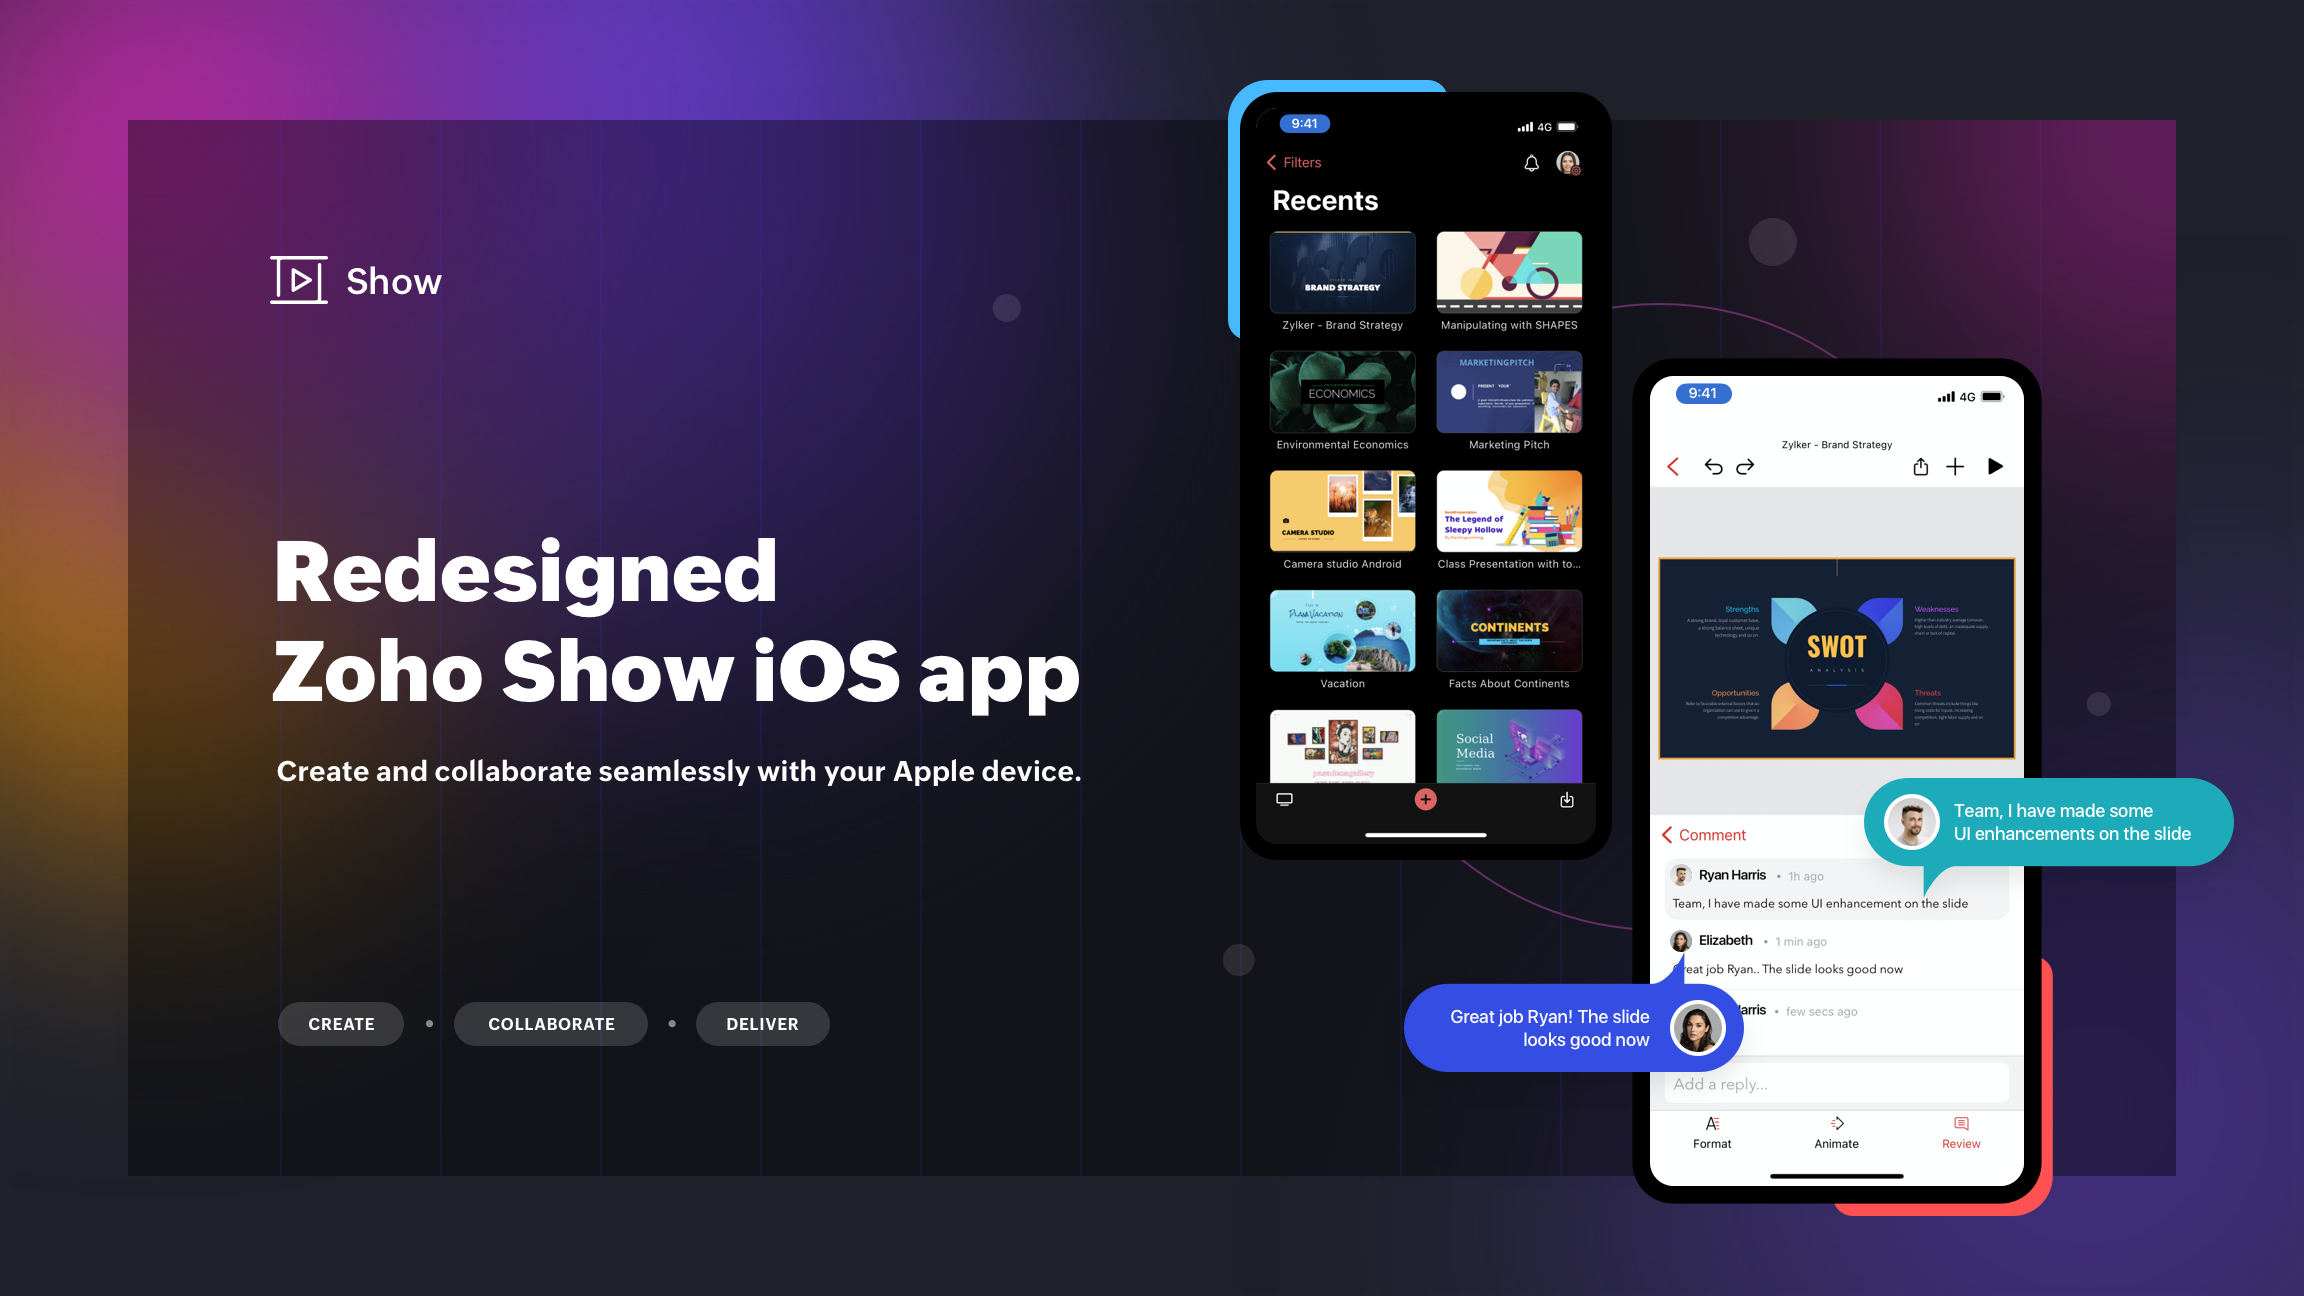 Introducing the Zoho Show iOS app: Redesigned to give you the ultimate presentation creation experience